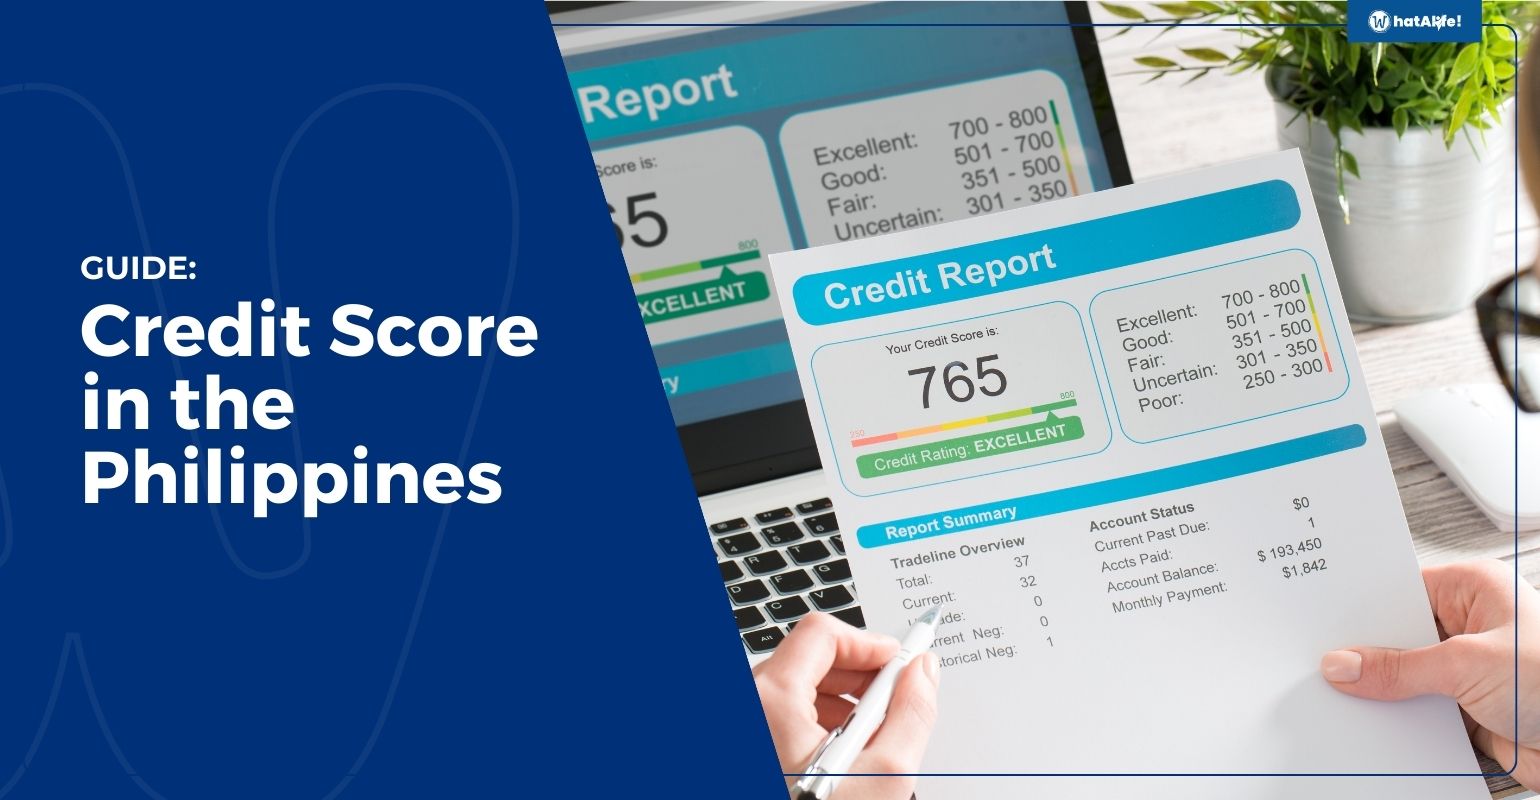 GUIDE: Credit Score in the Philippines